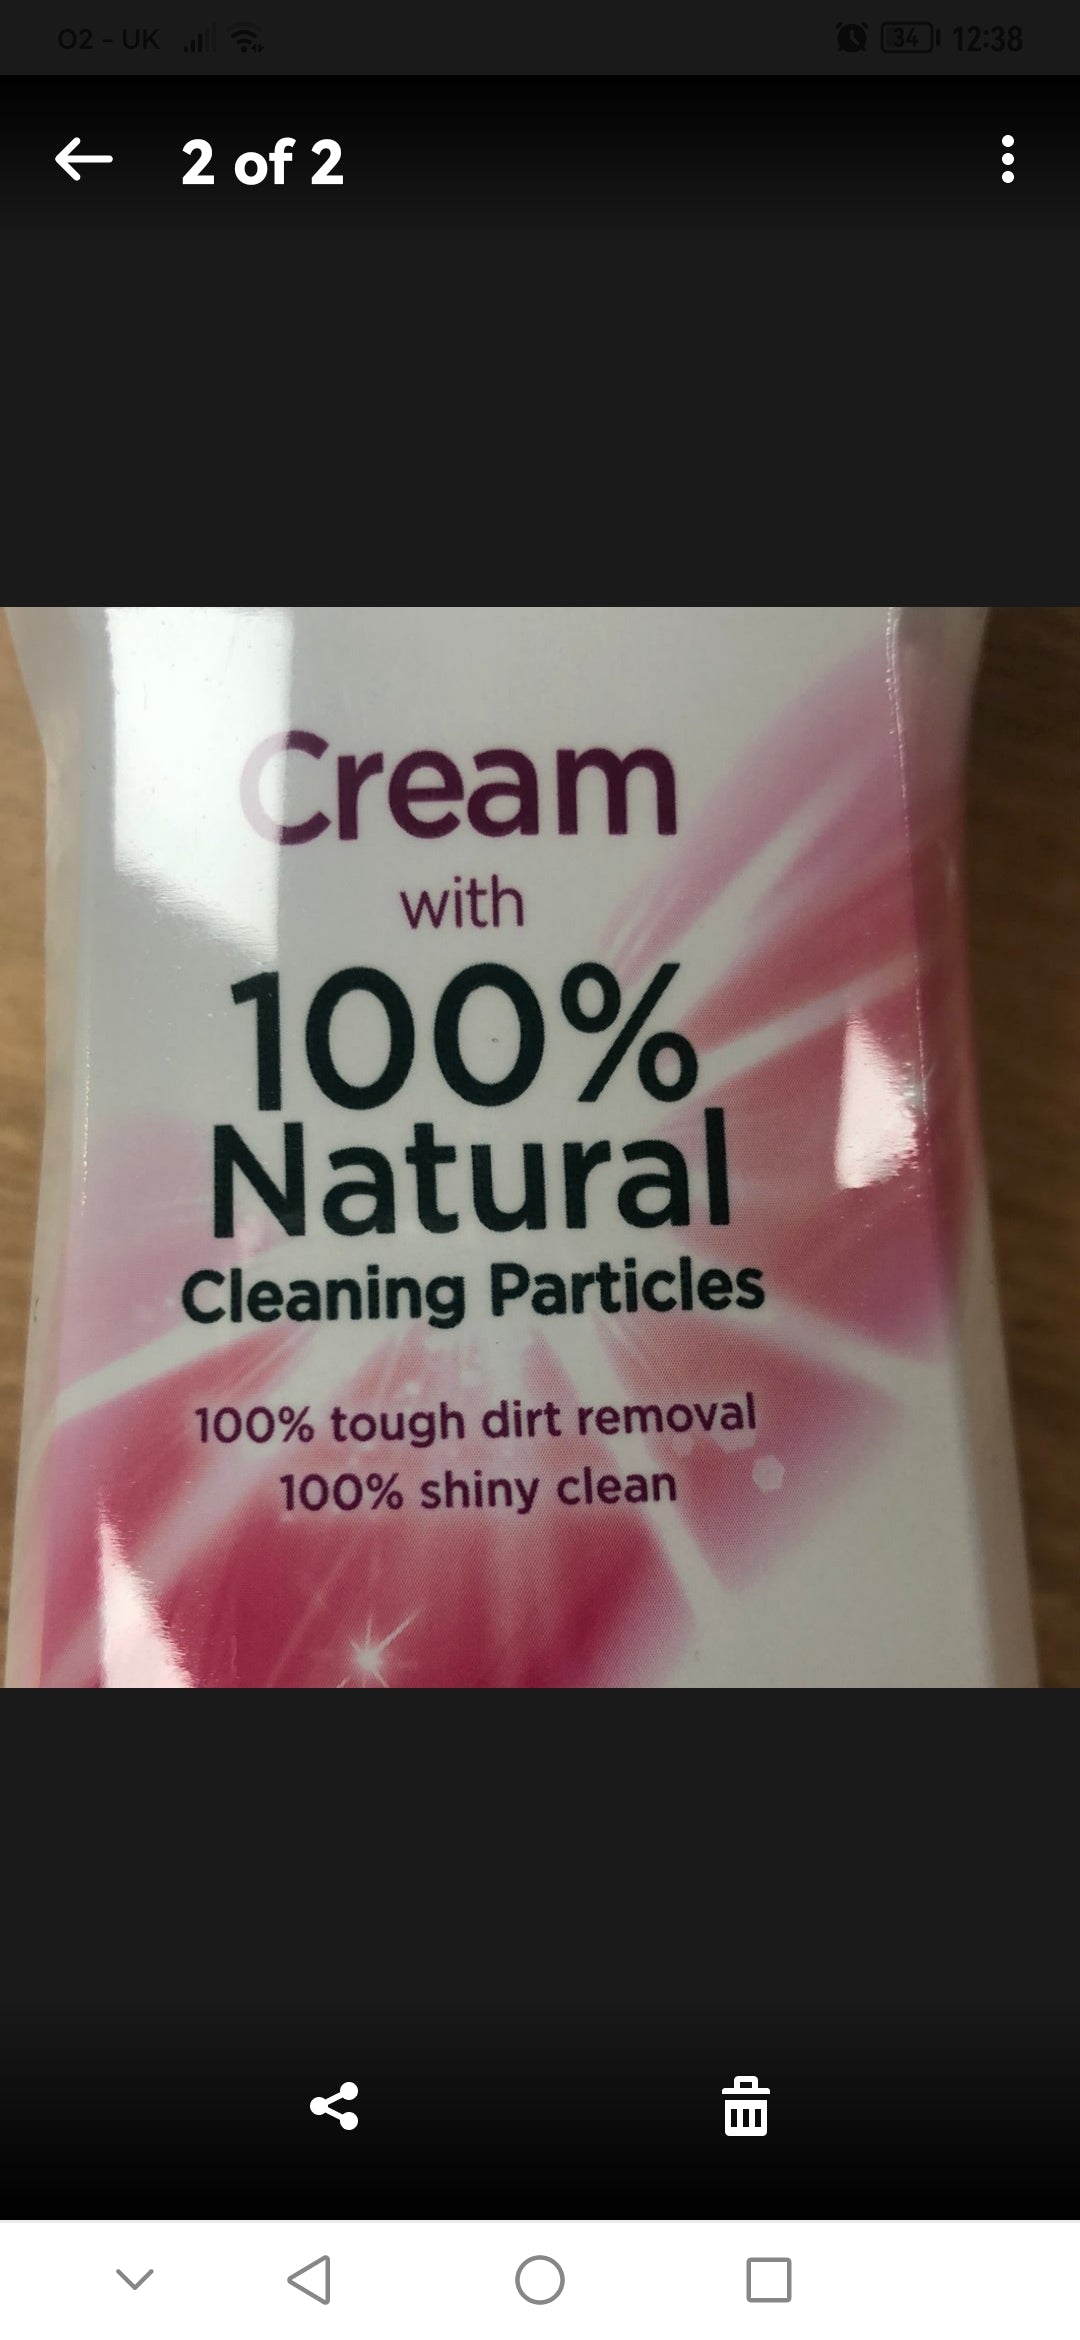 Cif cream cleaner 100% natural